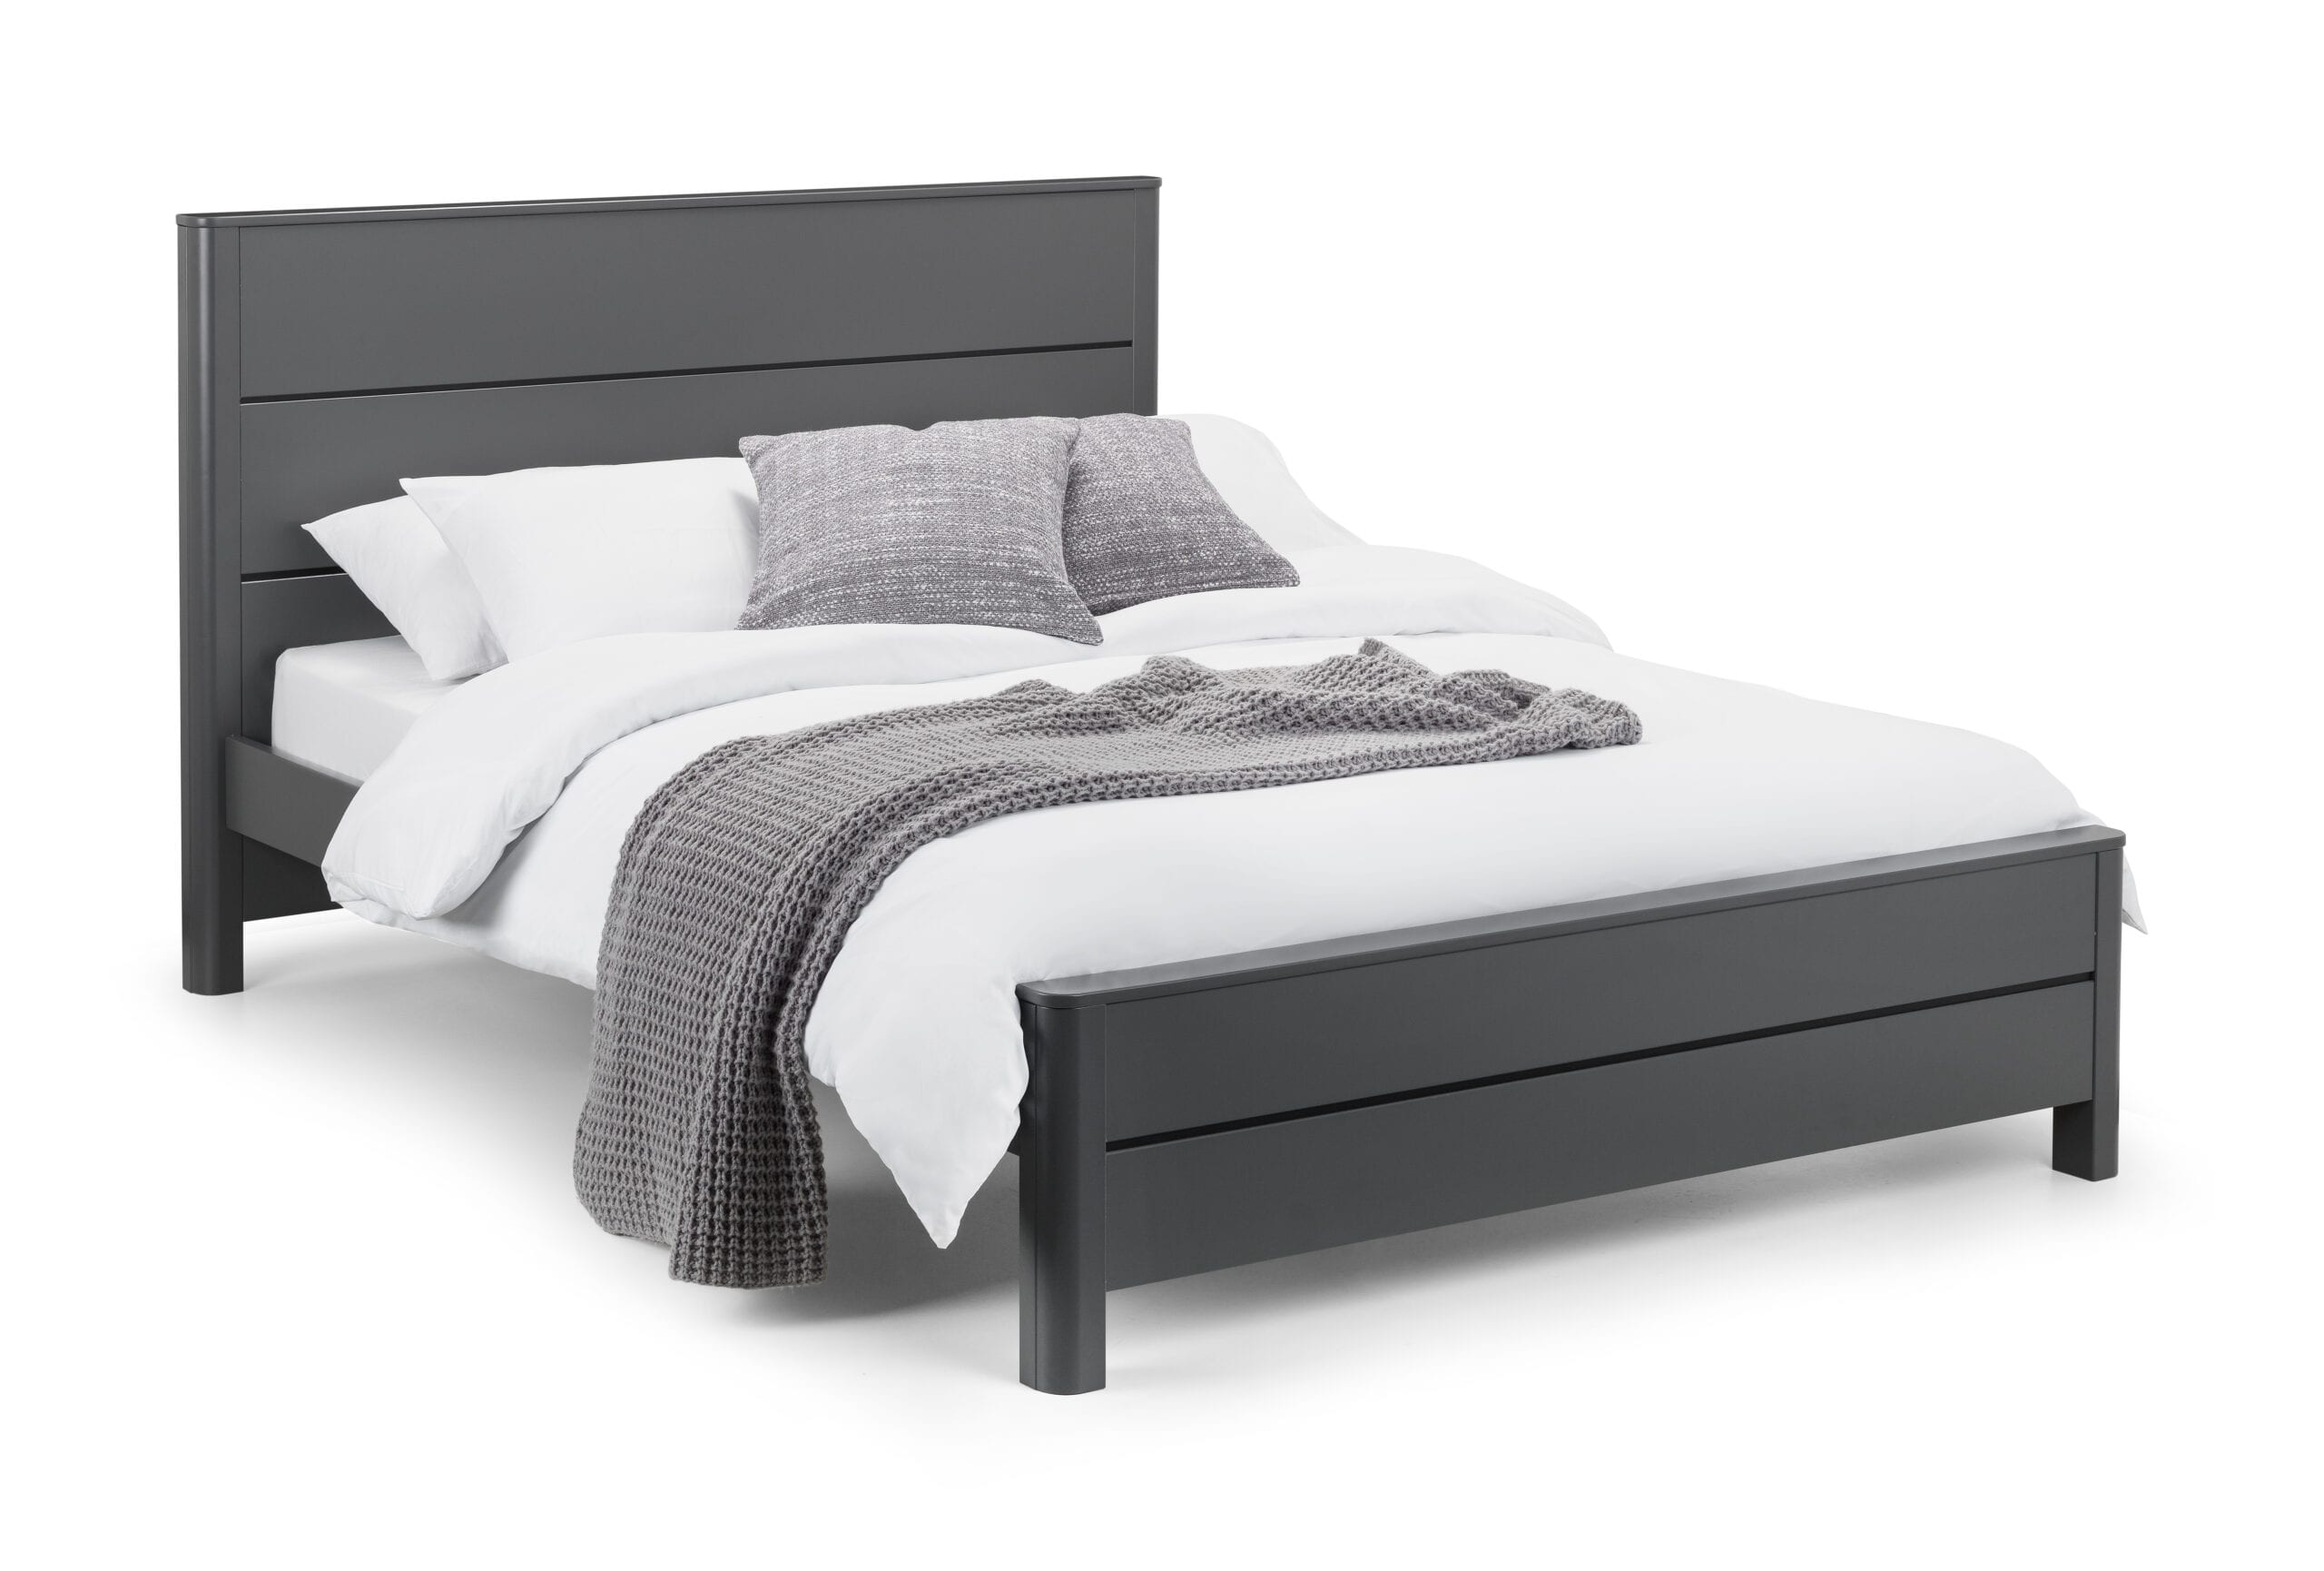 The Cleo Bed Storm Grey Lacquer